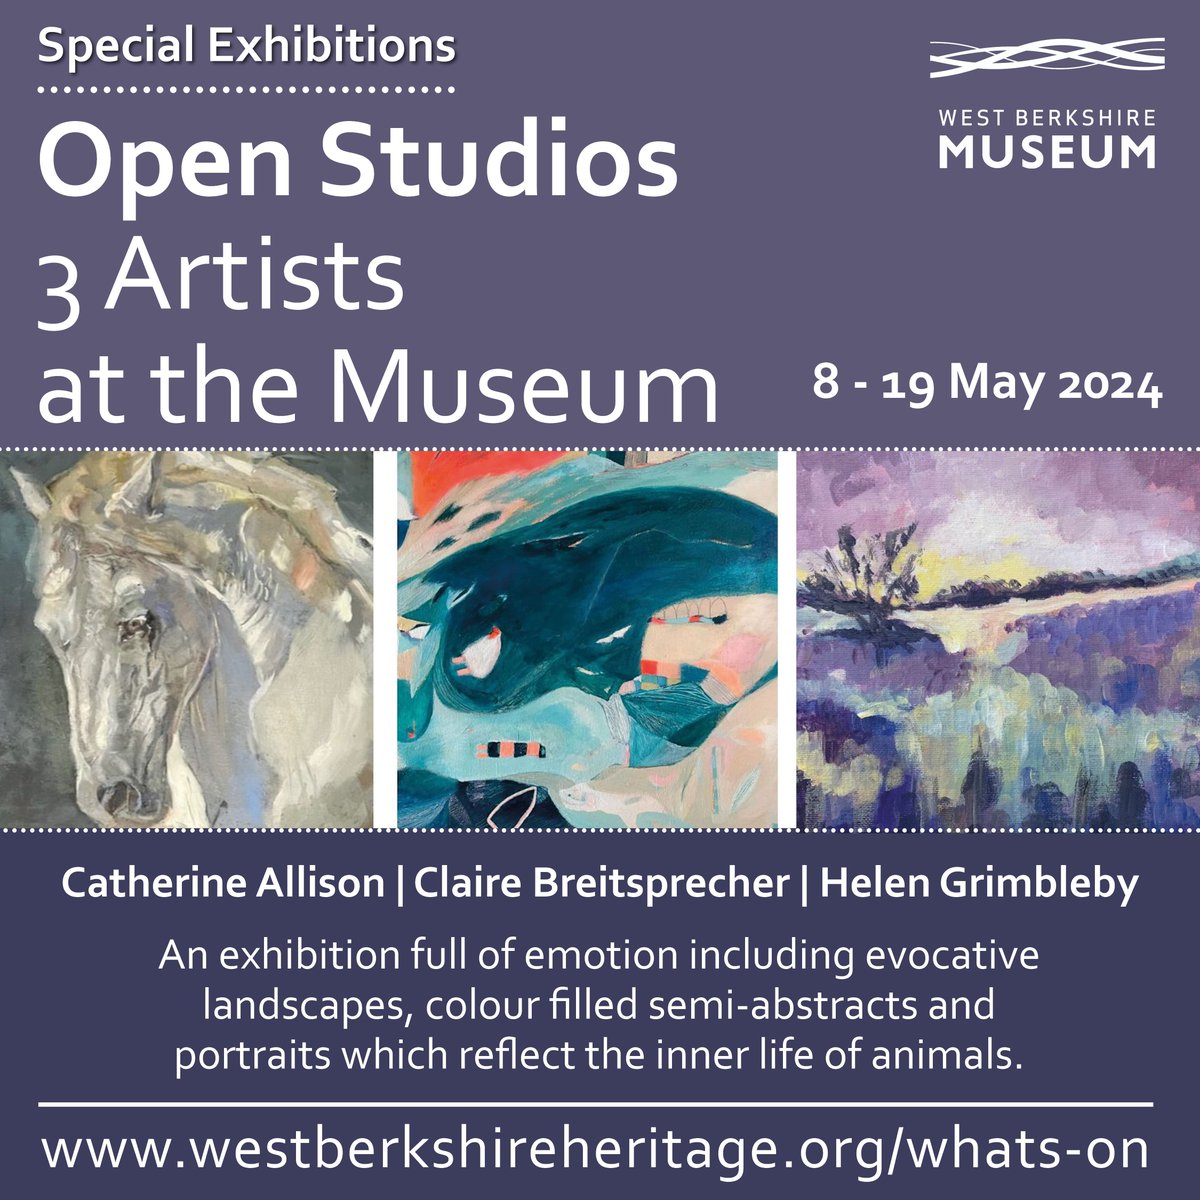 Drop in to see a wonderful #exhibition by the '3 Artists at the Museum' - Catherine Allison, Claire Breitsprecher and Helen Grimbleby #openstudios West Berkshire and North Hampshire @OS_WBNH